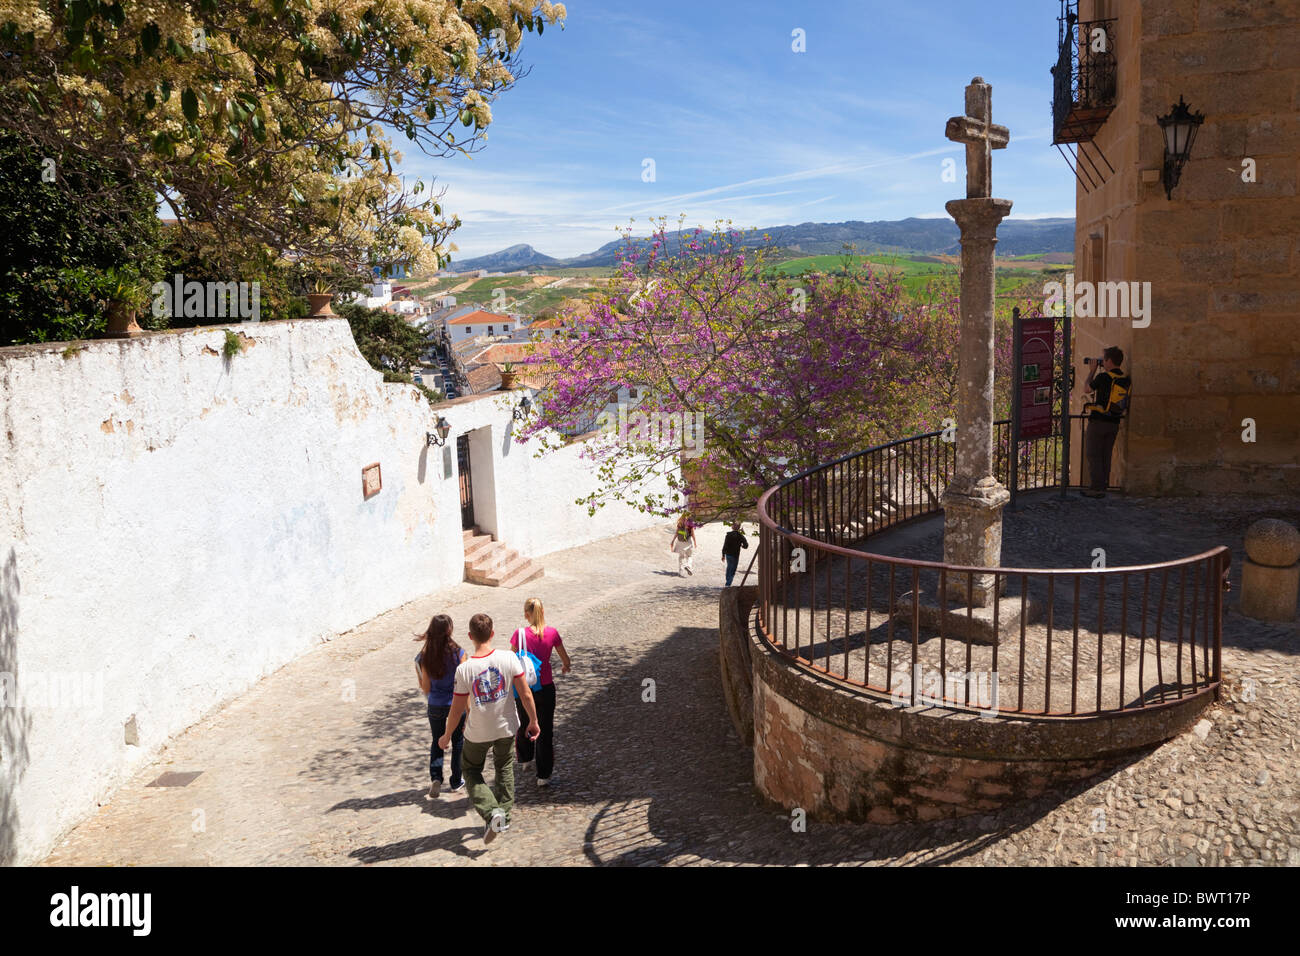 Ronda, Malaga Province, Spain. Tourists wandering down Calle Santo Domingo in the old city. Stock Photo